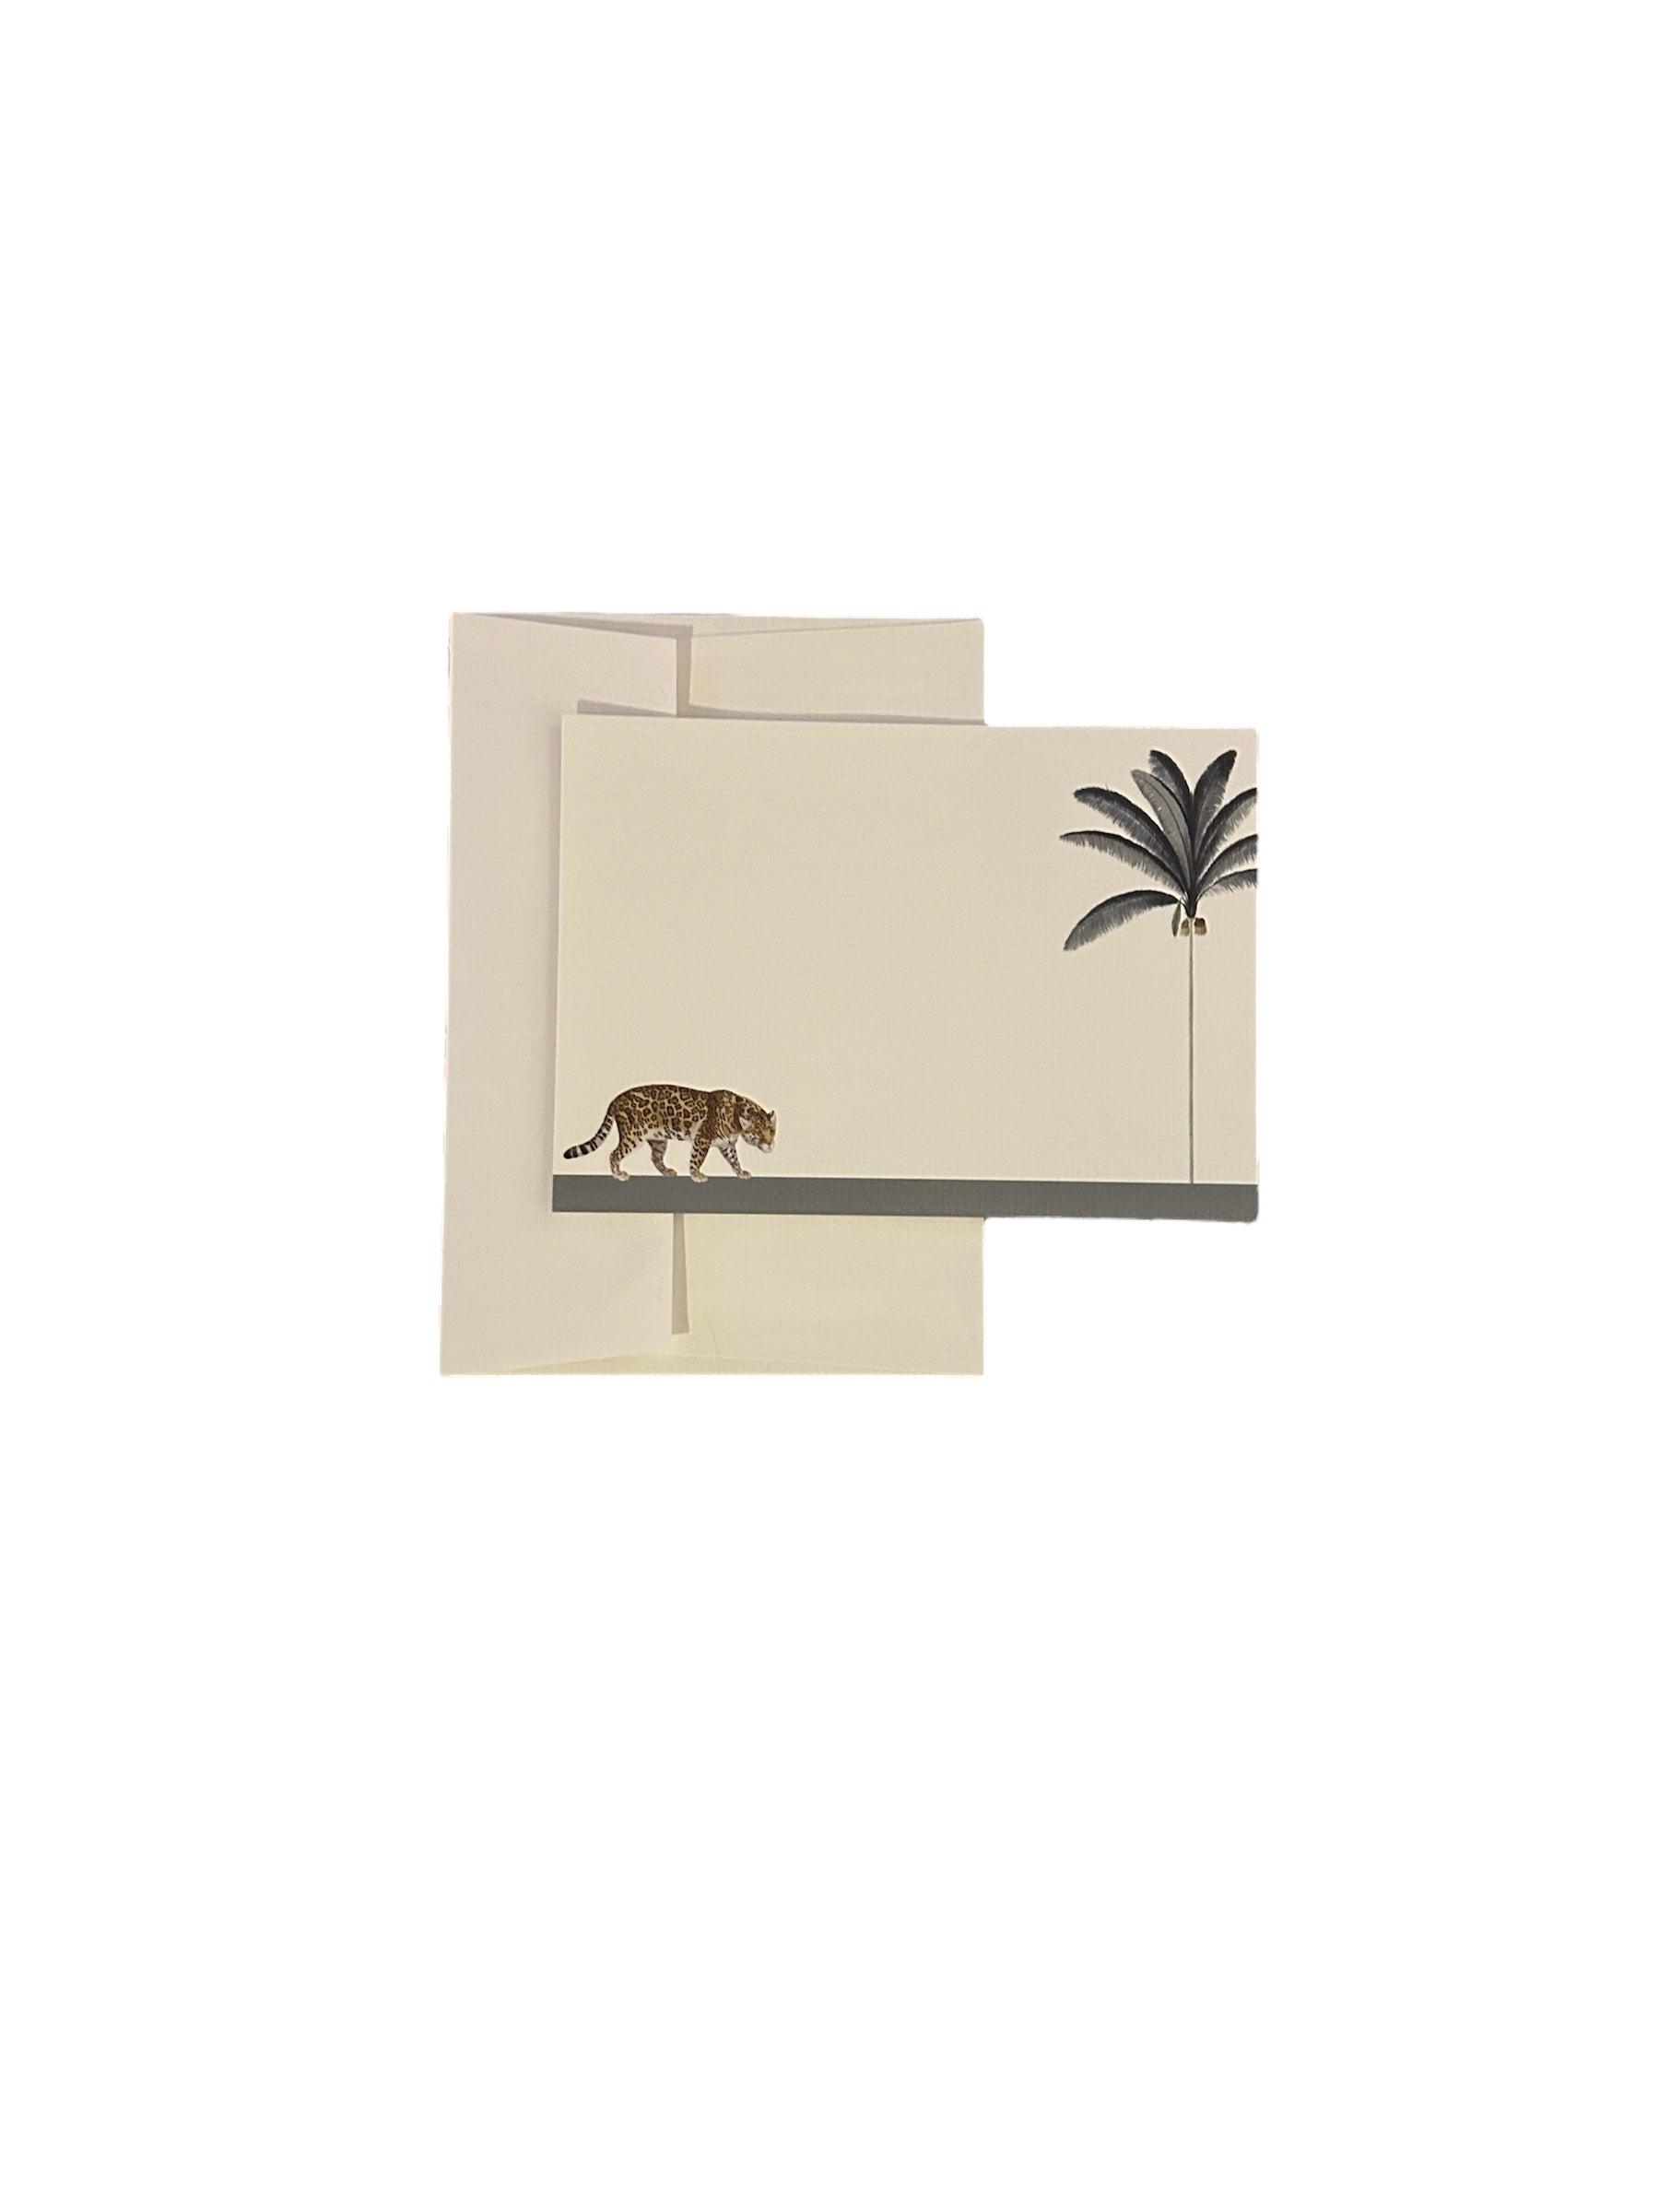 Darwin's Menagerie "Strutting Peacock Prowling Leopard" Notecard Set with Laid Envelopes